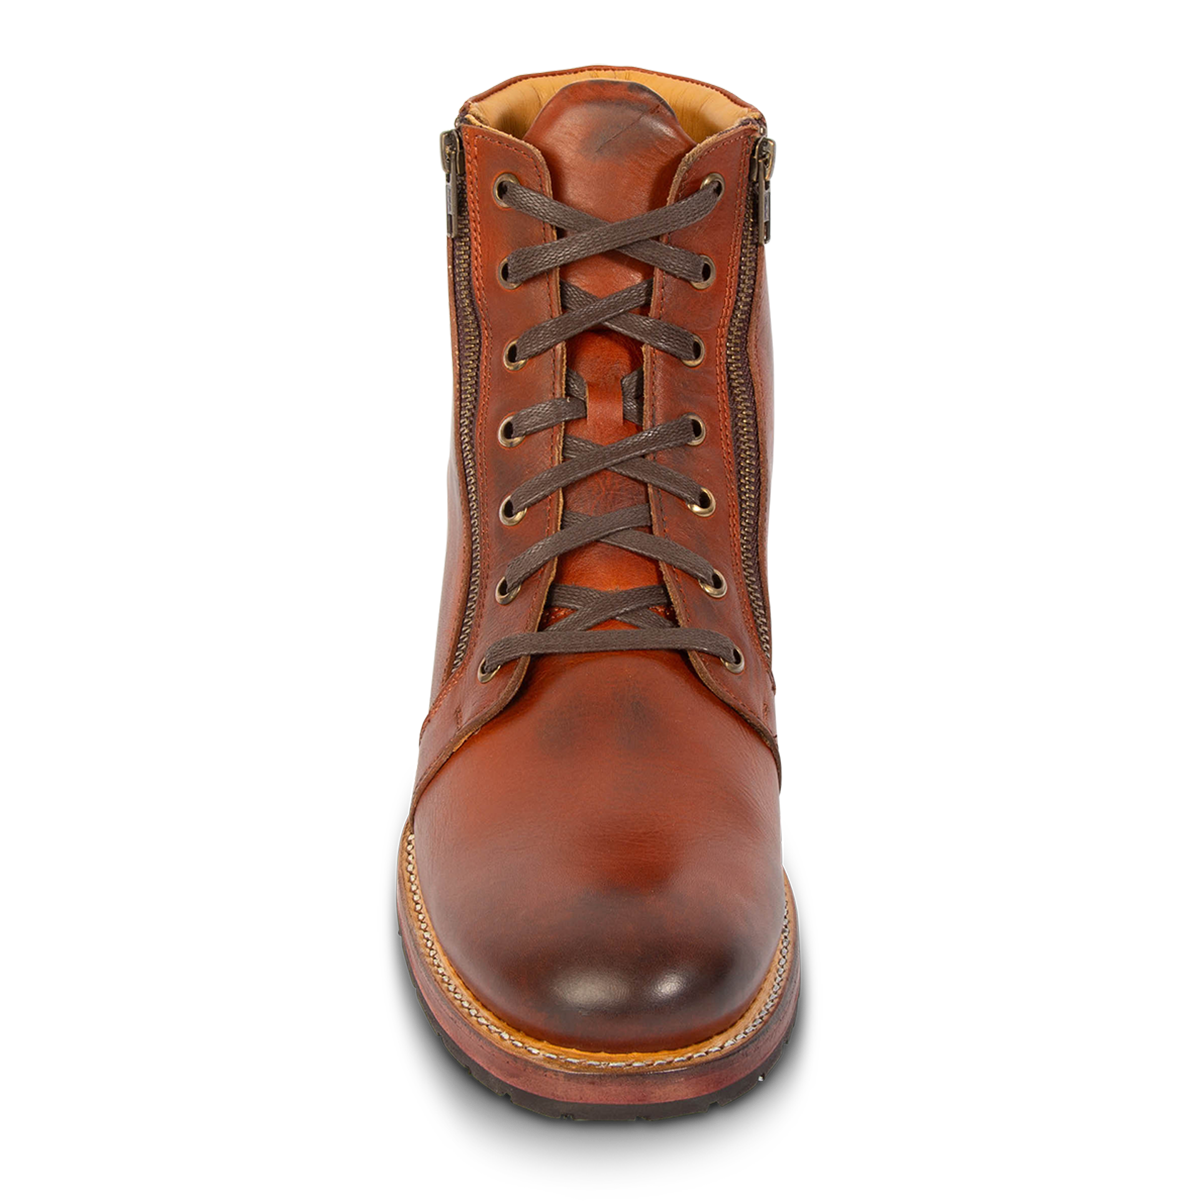 Front view showing symmetrical brass zipper closures and front tie lacing on FREEBIRD men's Chevy rust leather boot